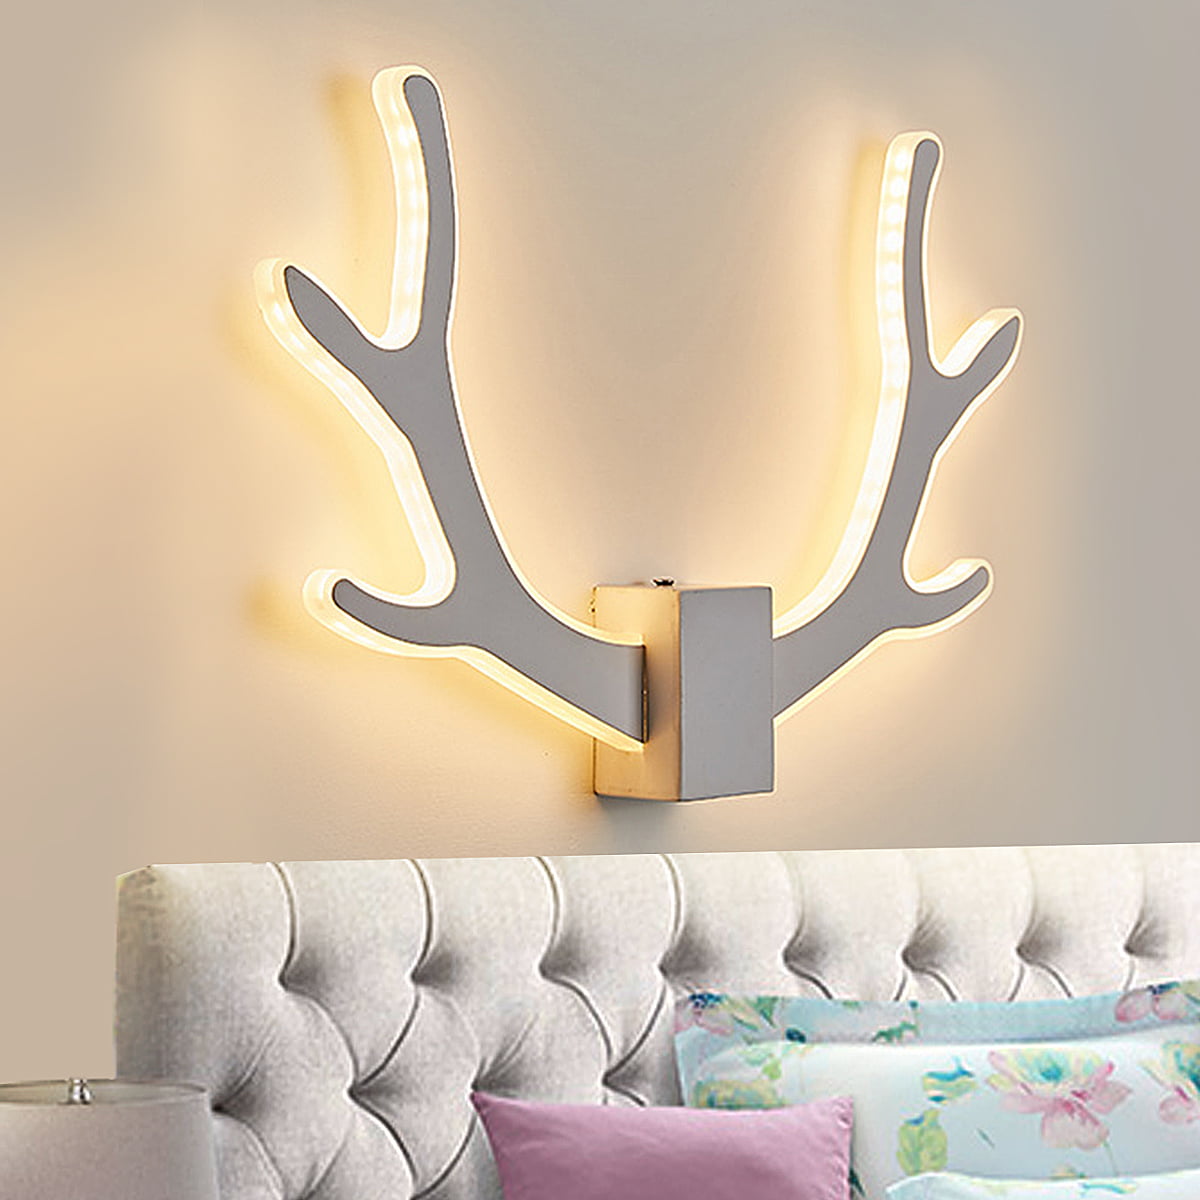 Simple Creative Home Design Creative Bedside Modern Wall Lamp Wall Lamp &Living Room Wall Lights Wall Lamp Dimmable LED Wall Lamp Color : B-Warm Light 